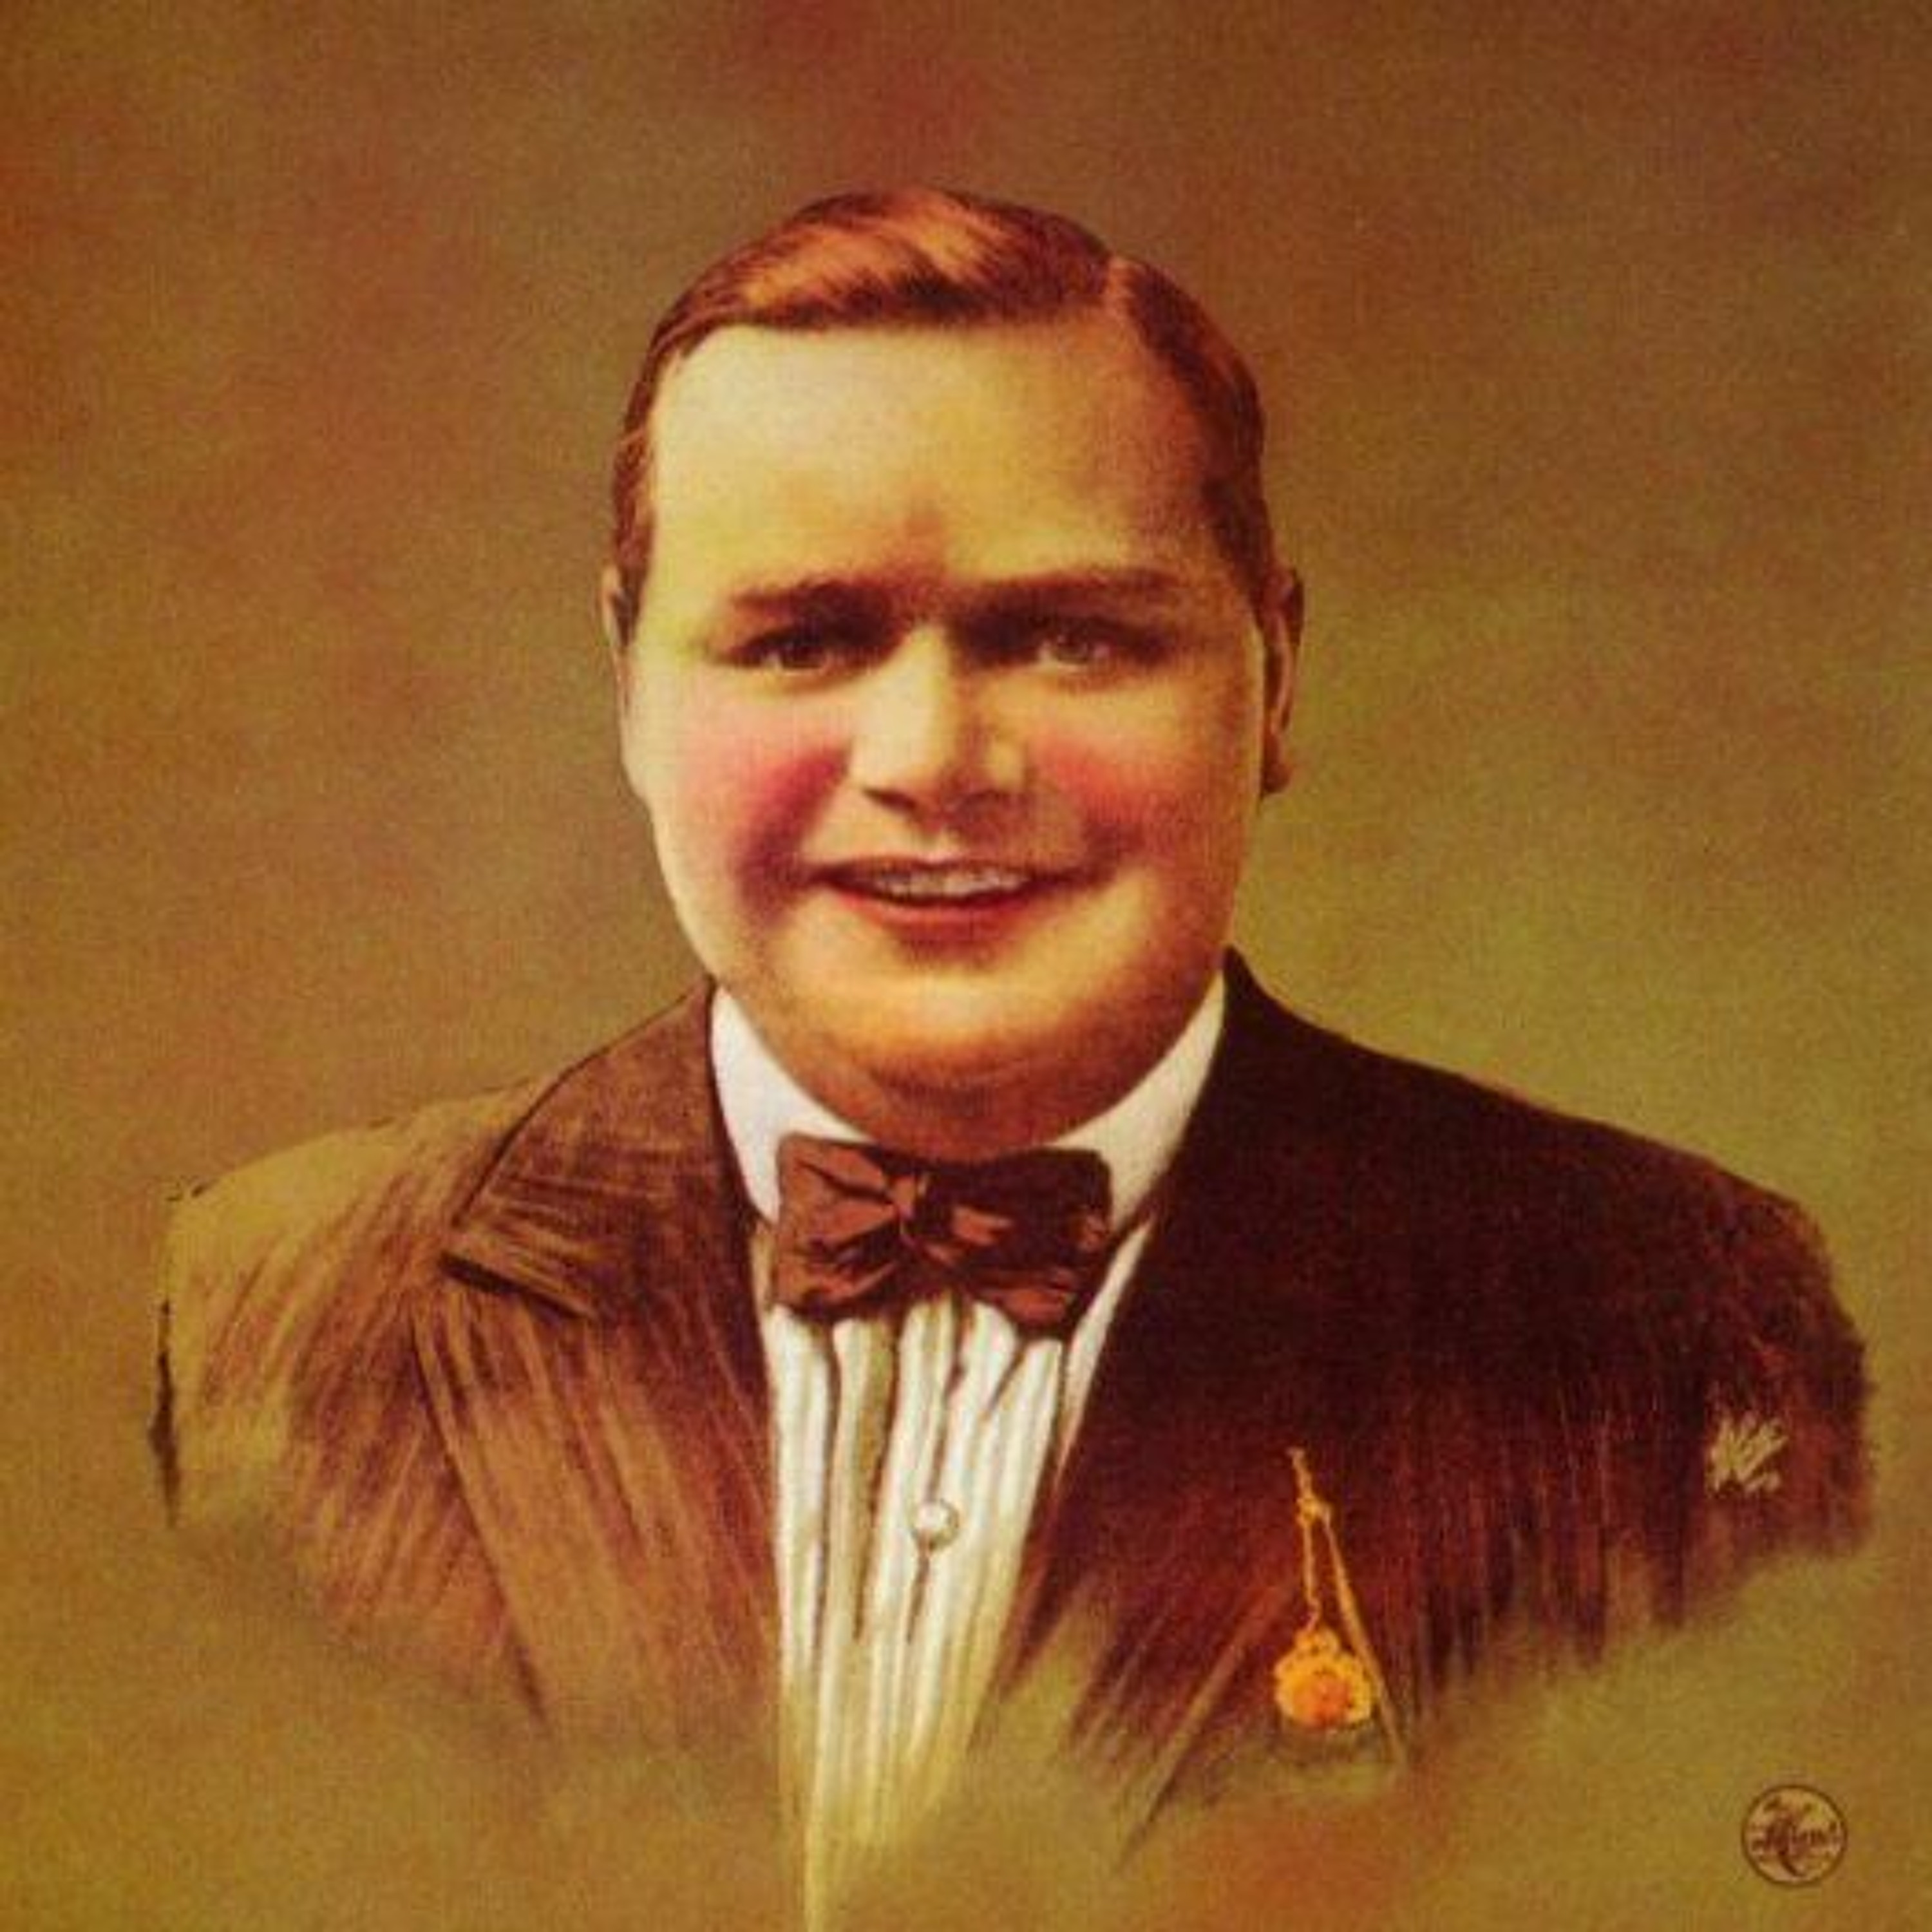 Episode 86: Roscoe ”Fatty” Arbuckle, Part One - The Rise